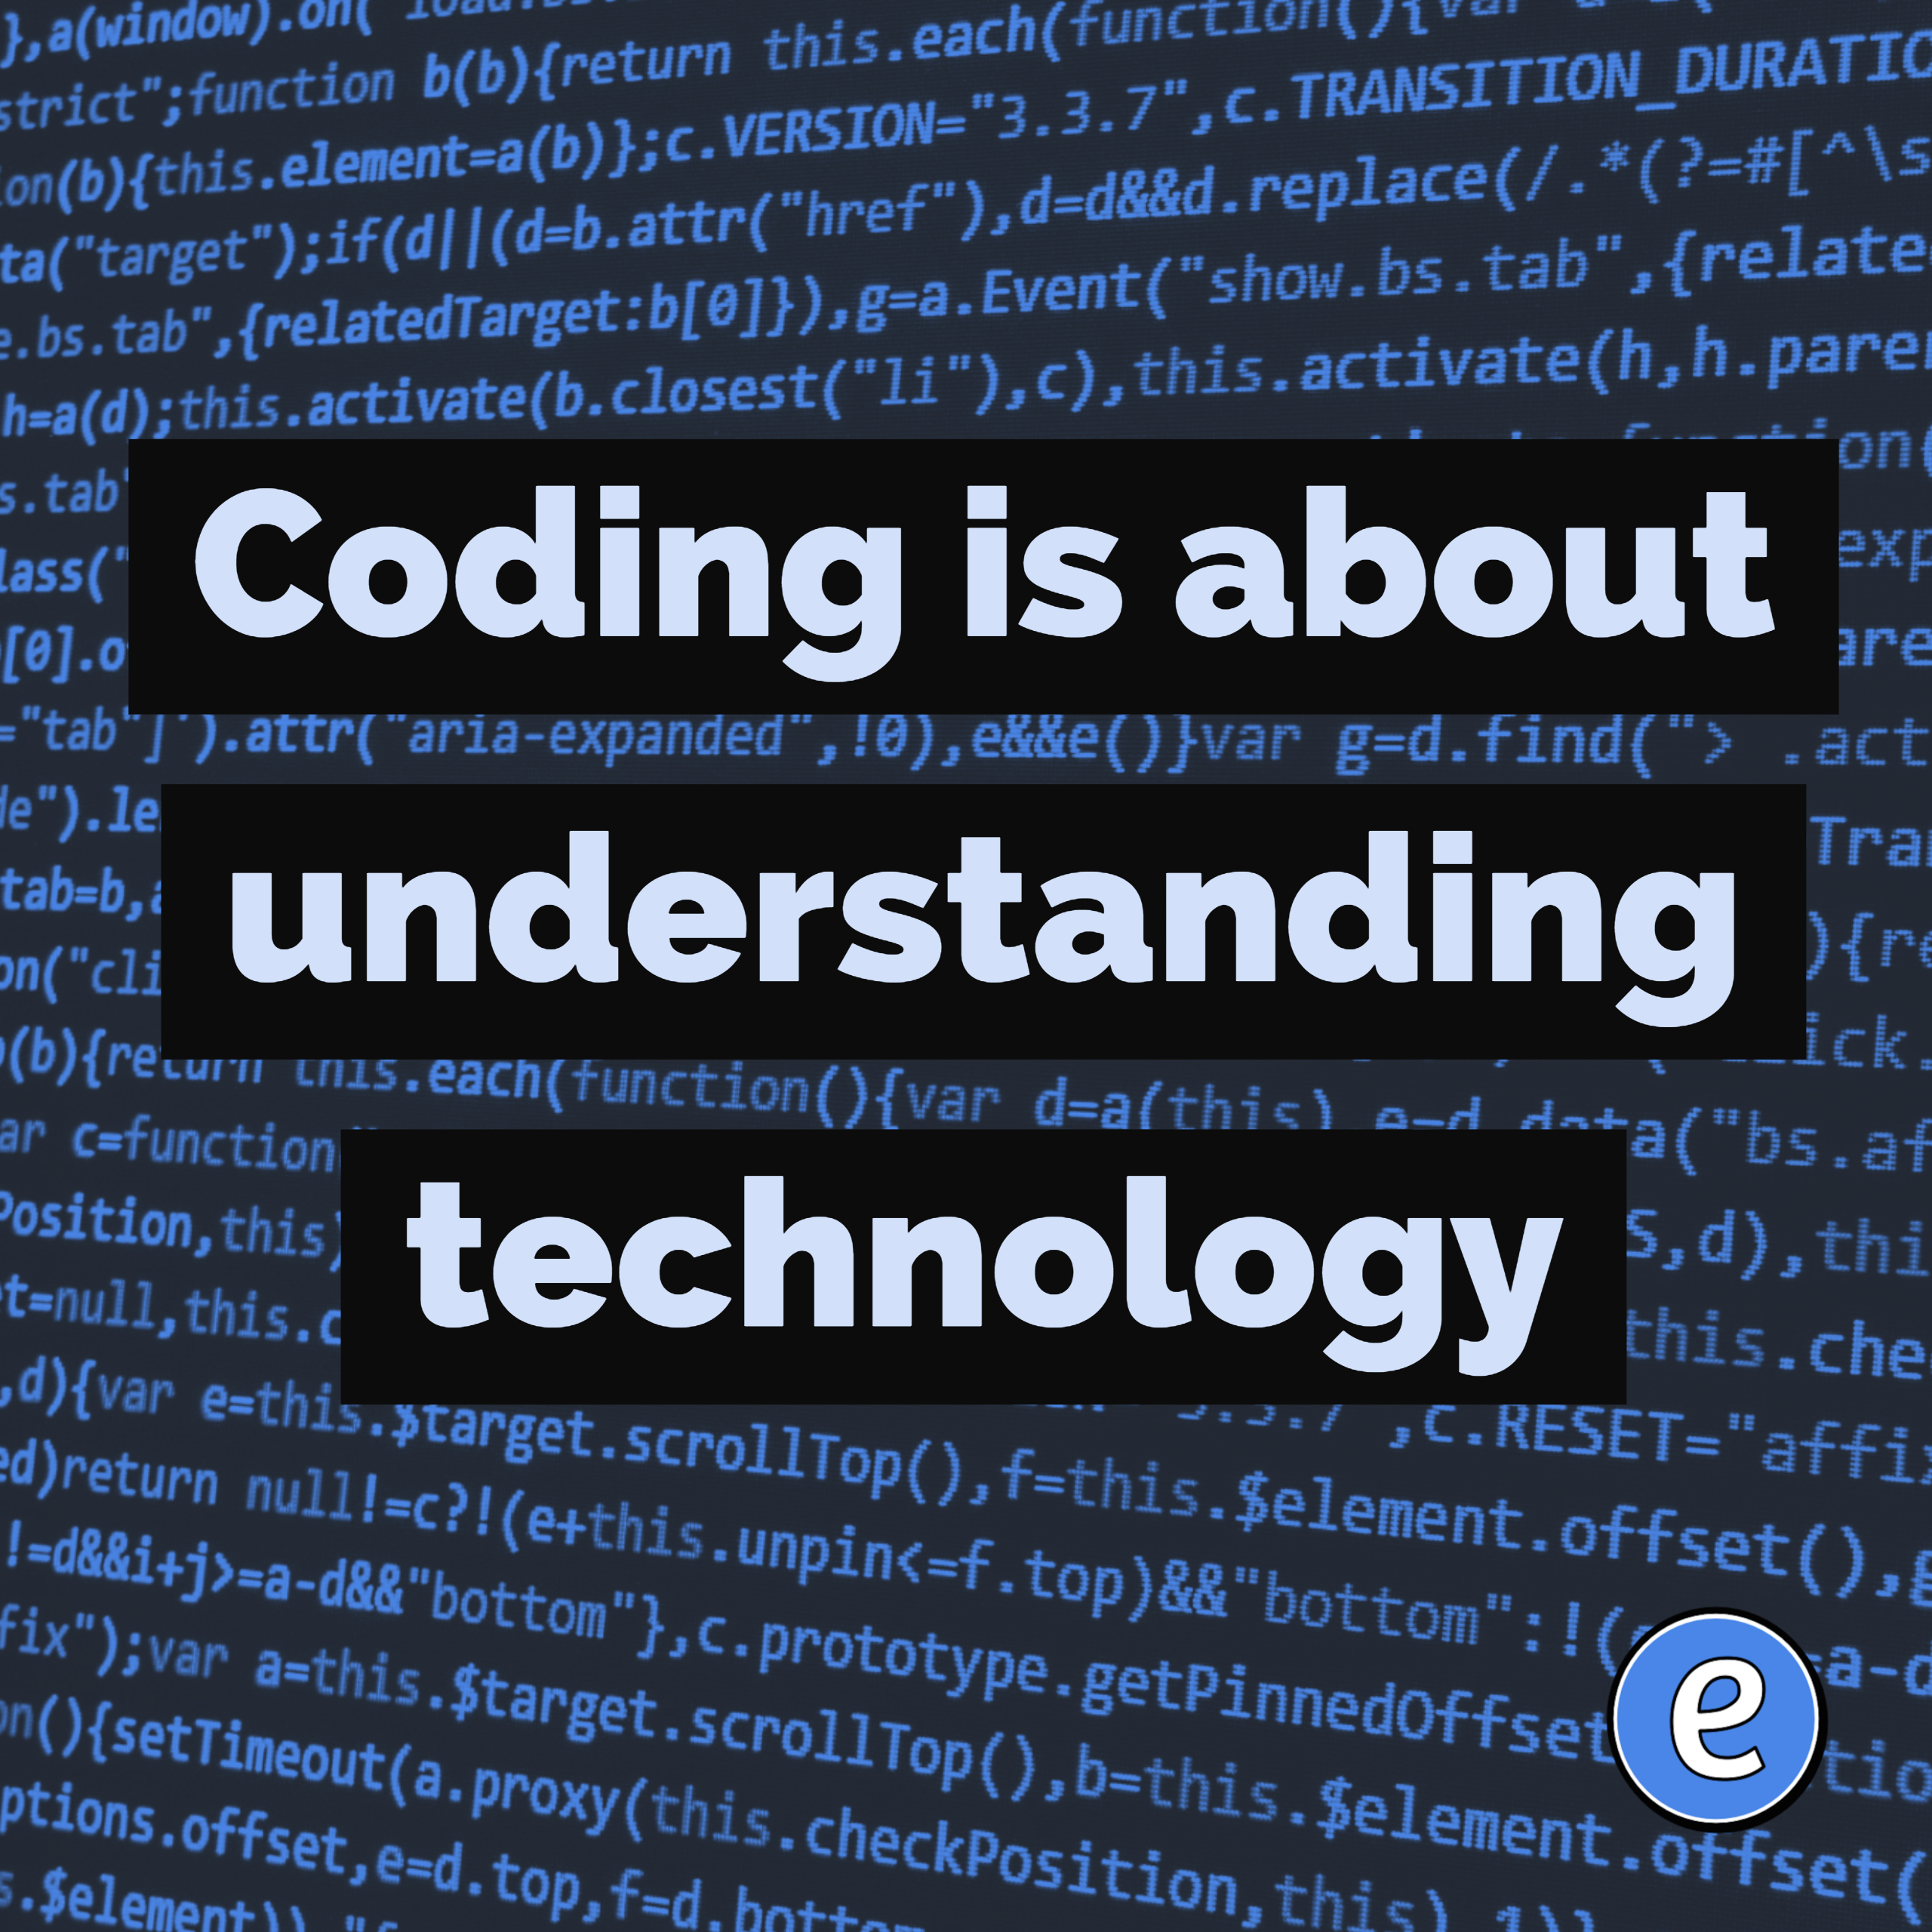 Coding is about understanding technology